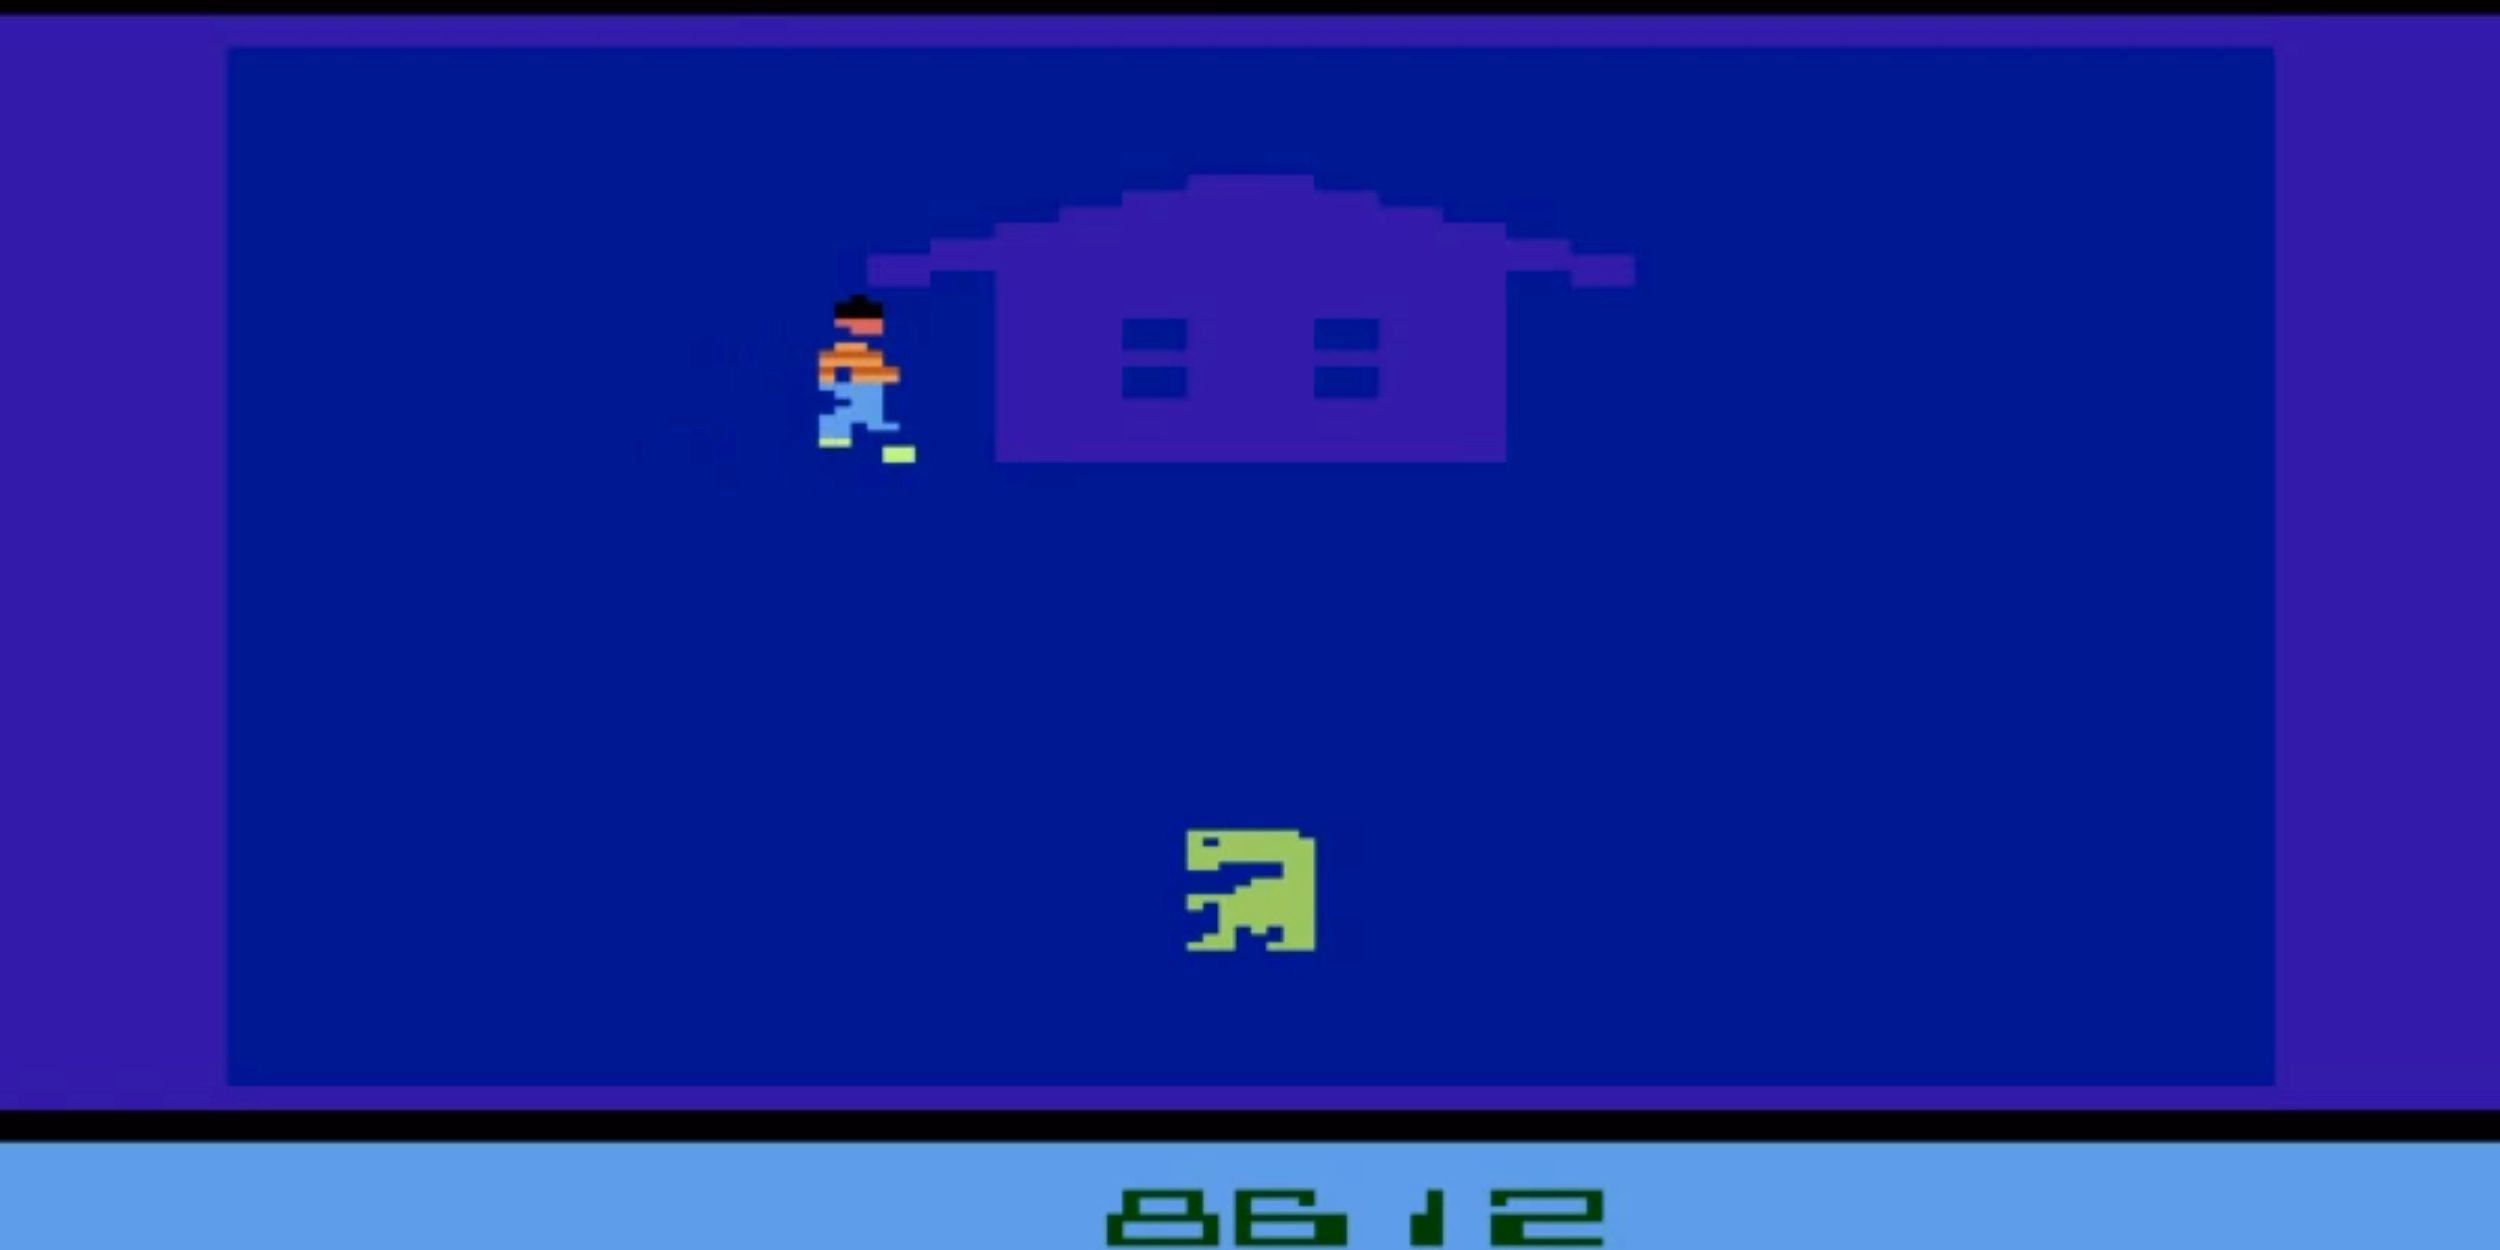 A screenshot of the E.T. video game by Atari, showing a pixellated E.T. against a blue background